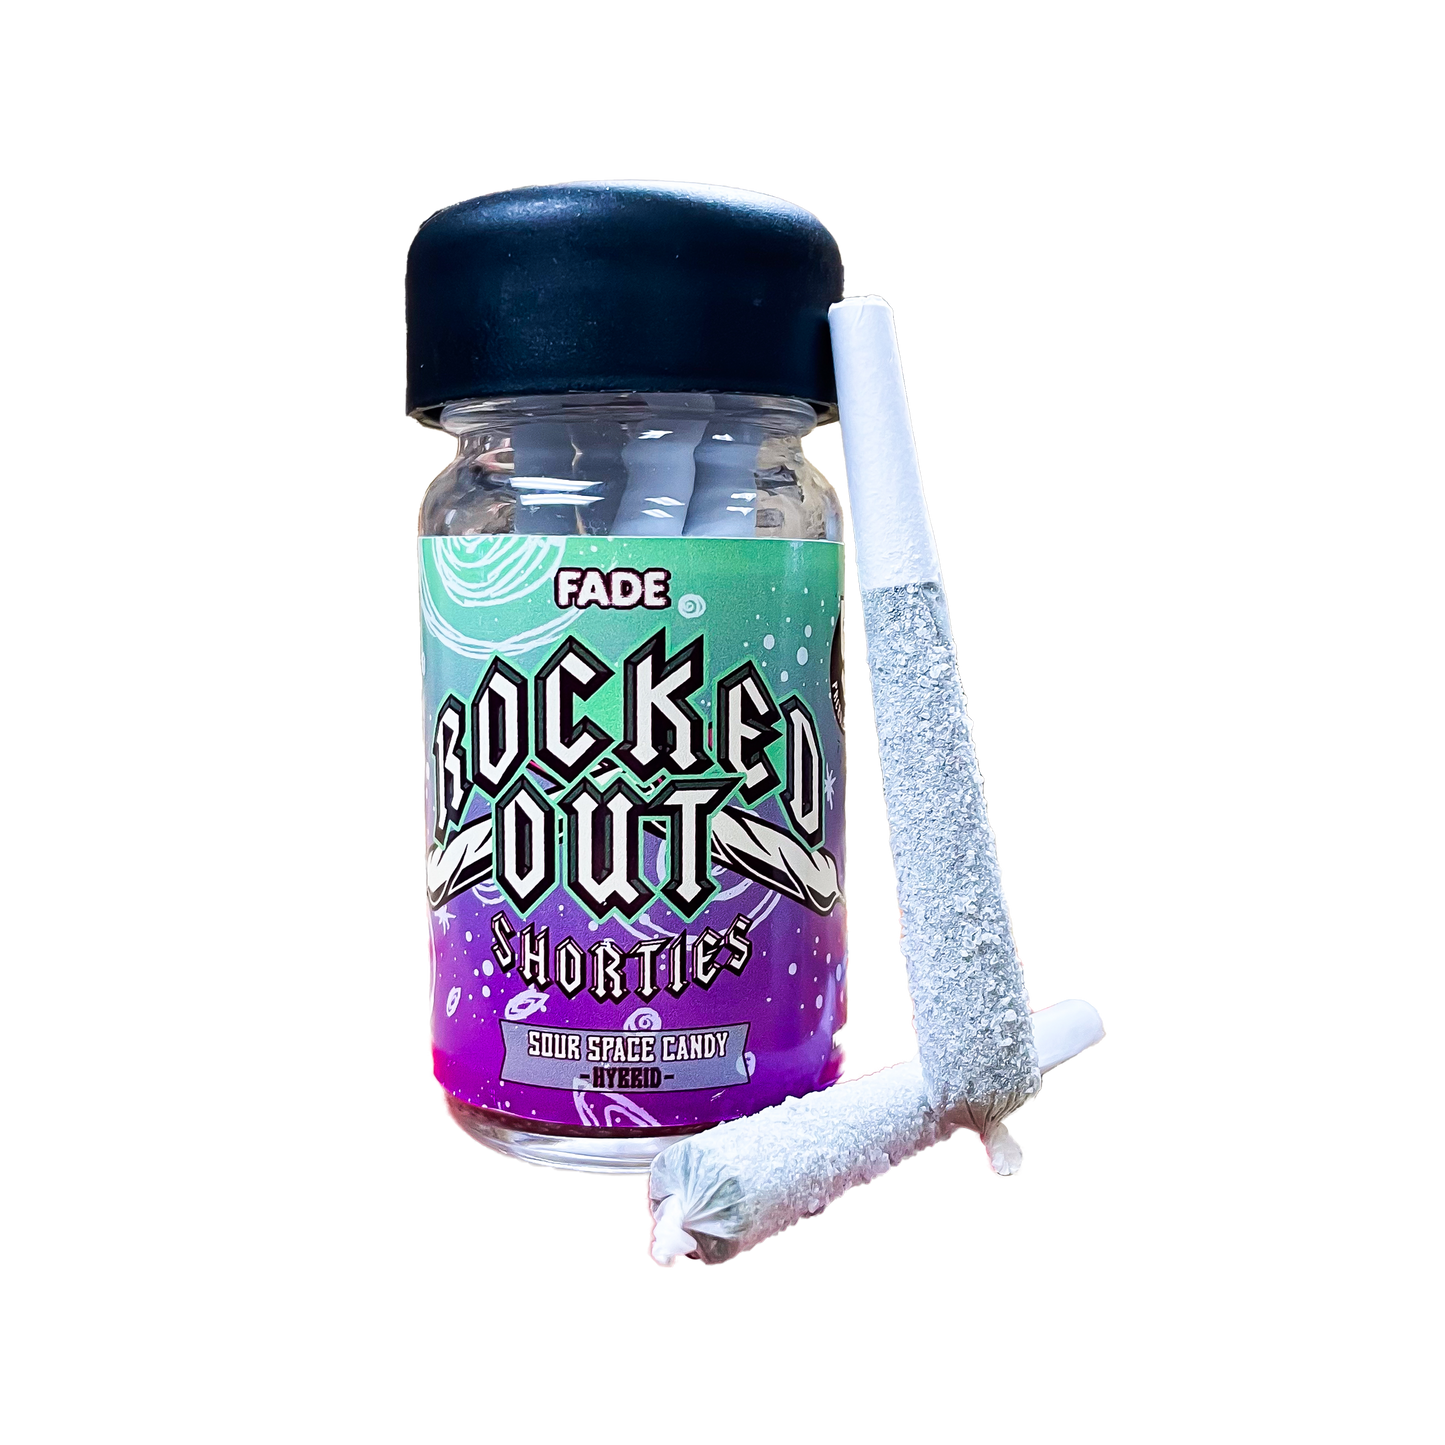 FADE Shorties - Rocked Out -  Diamond Covered Prerolls 5pk